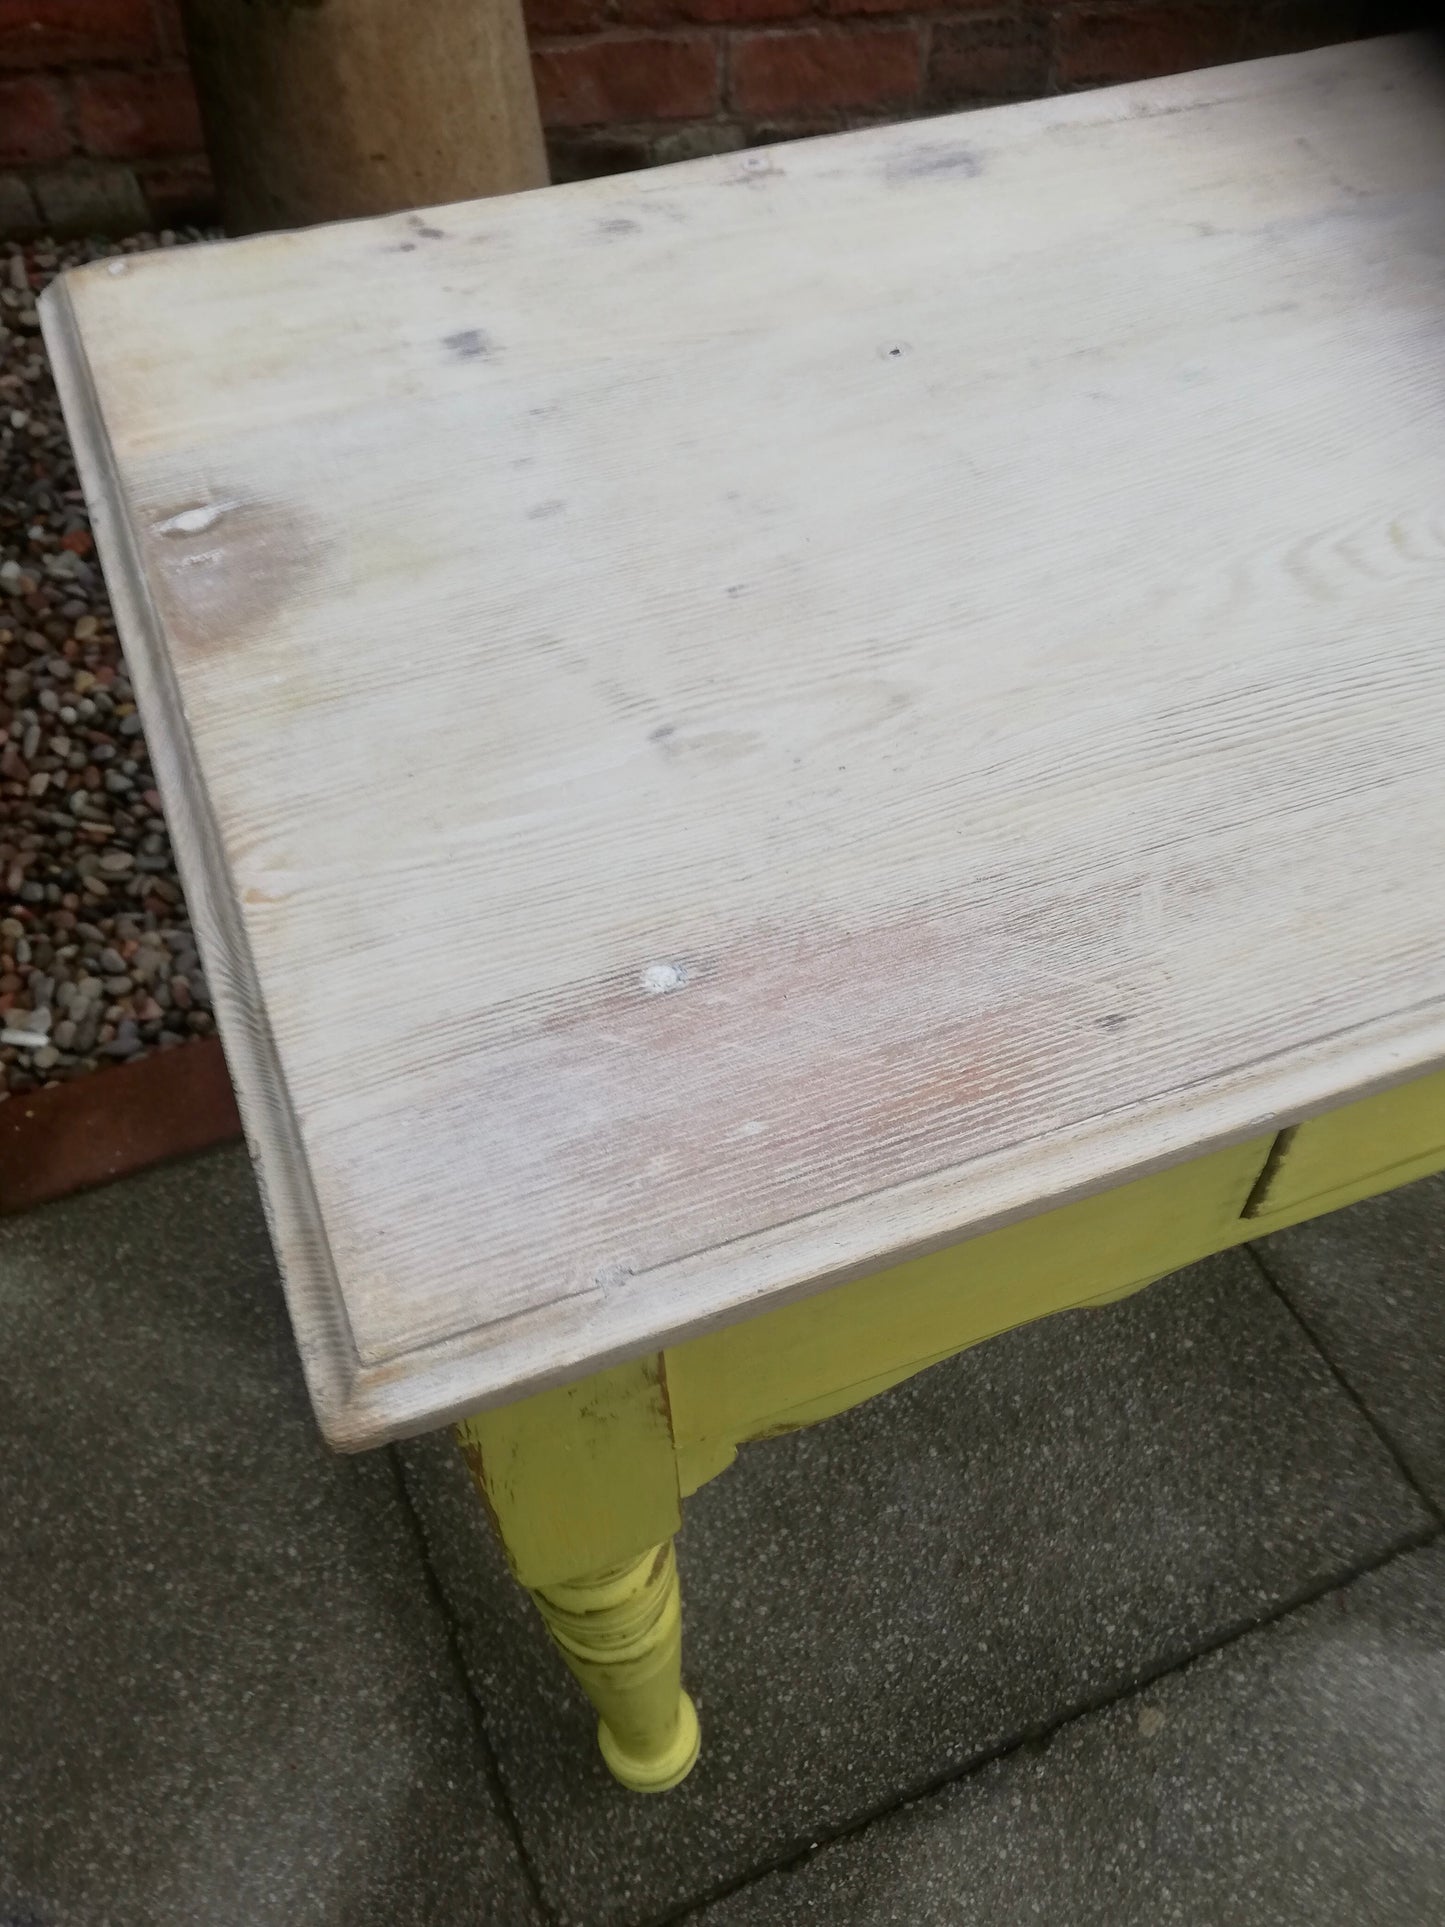 Vintage console/hall table/ kids desk painted in vibrant yellow